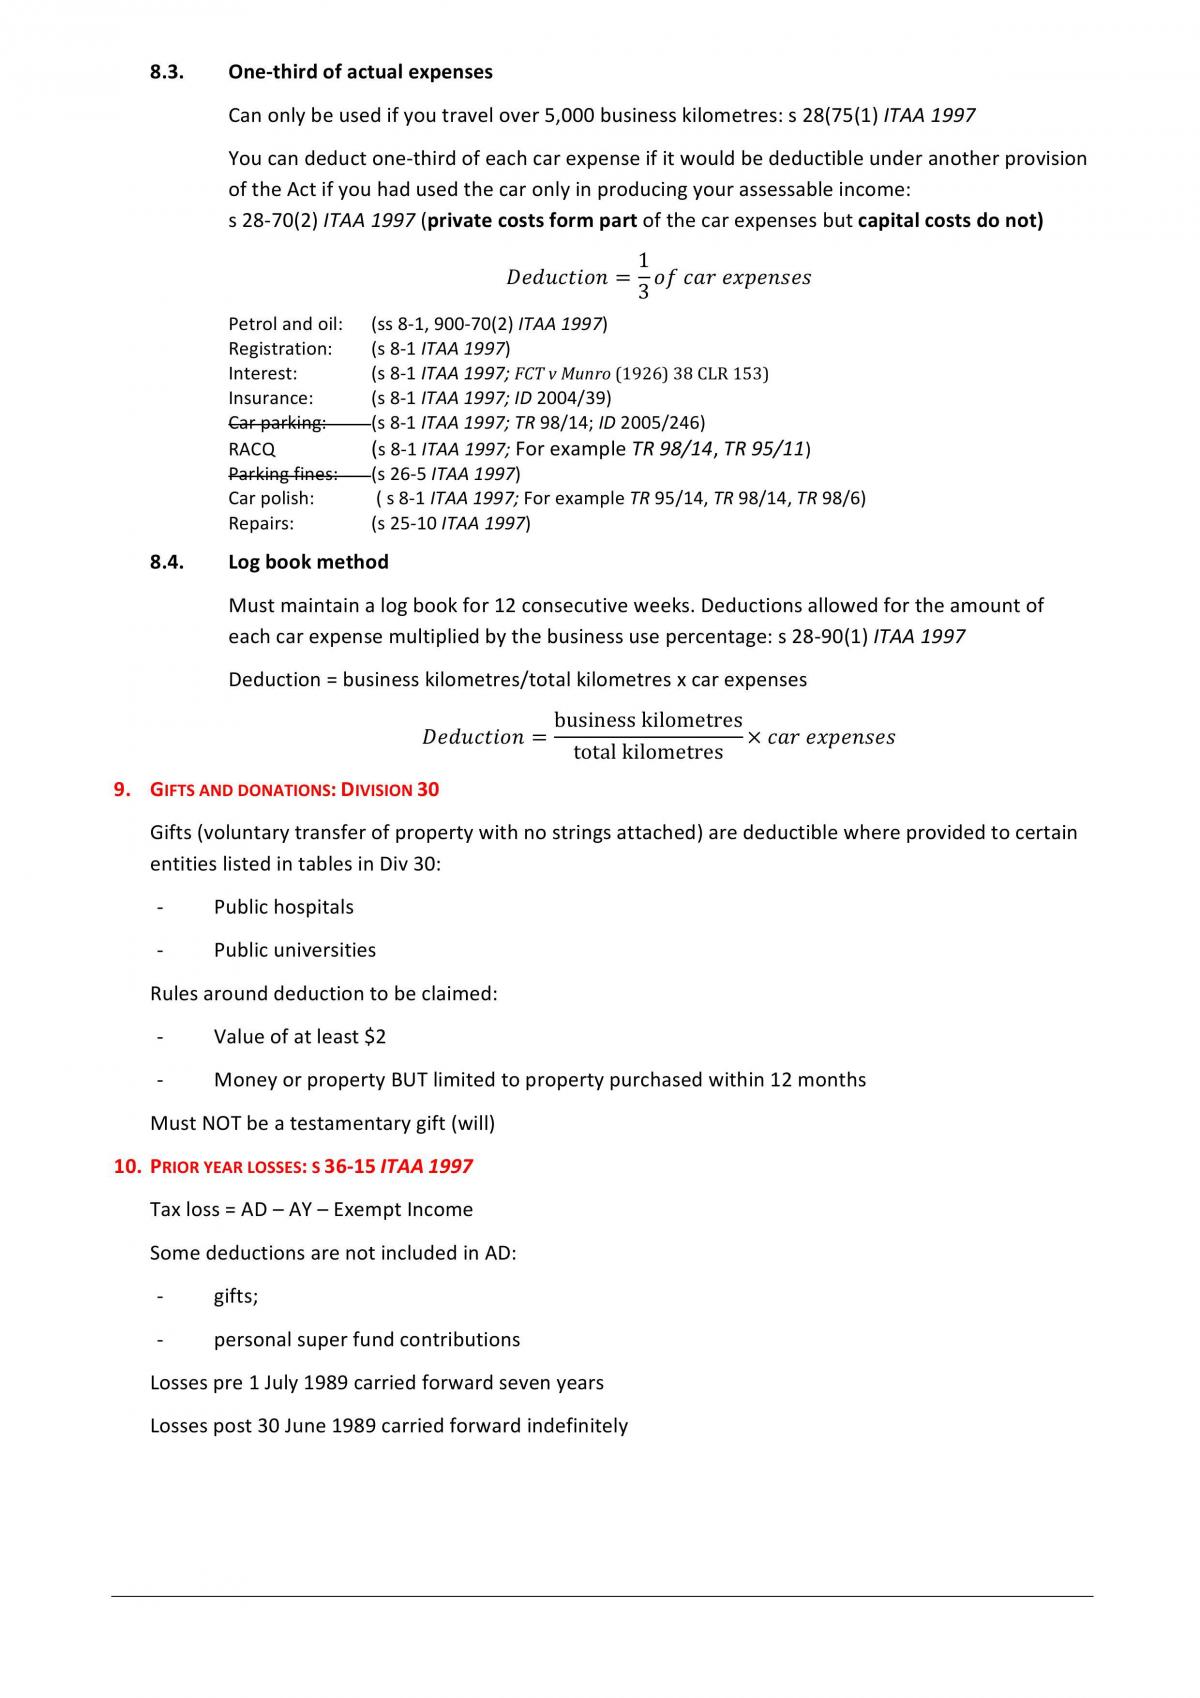 Laws5144 - Tax Notes - Page 49